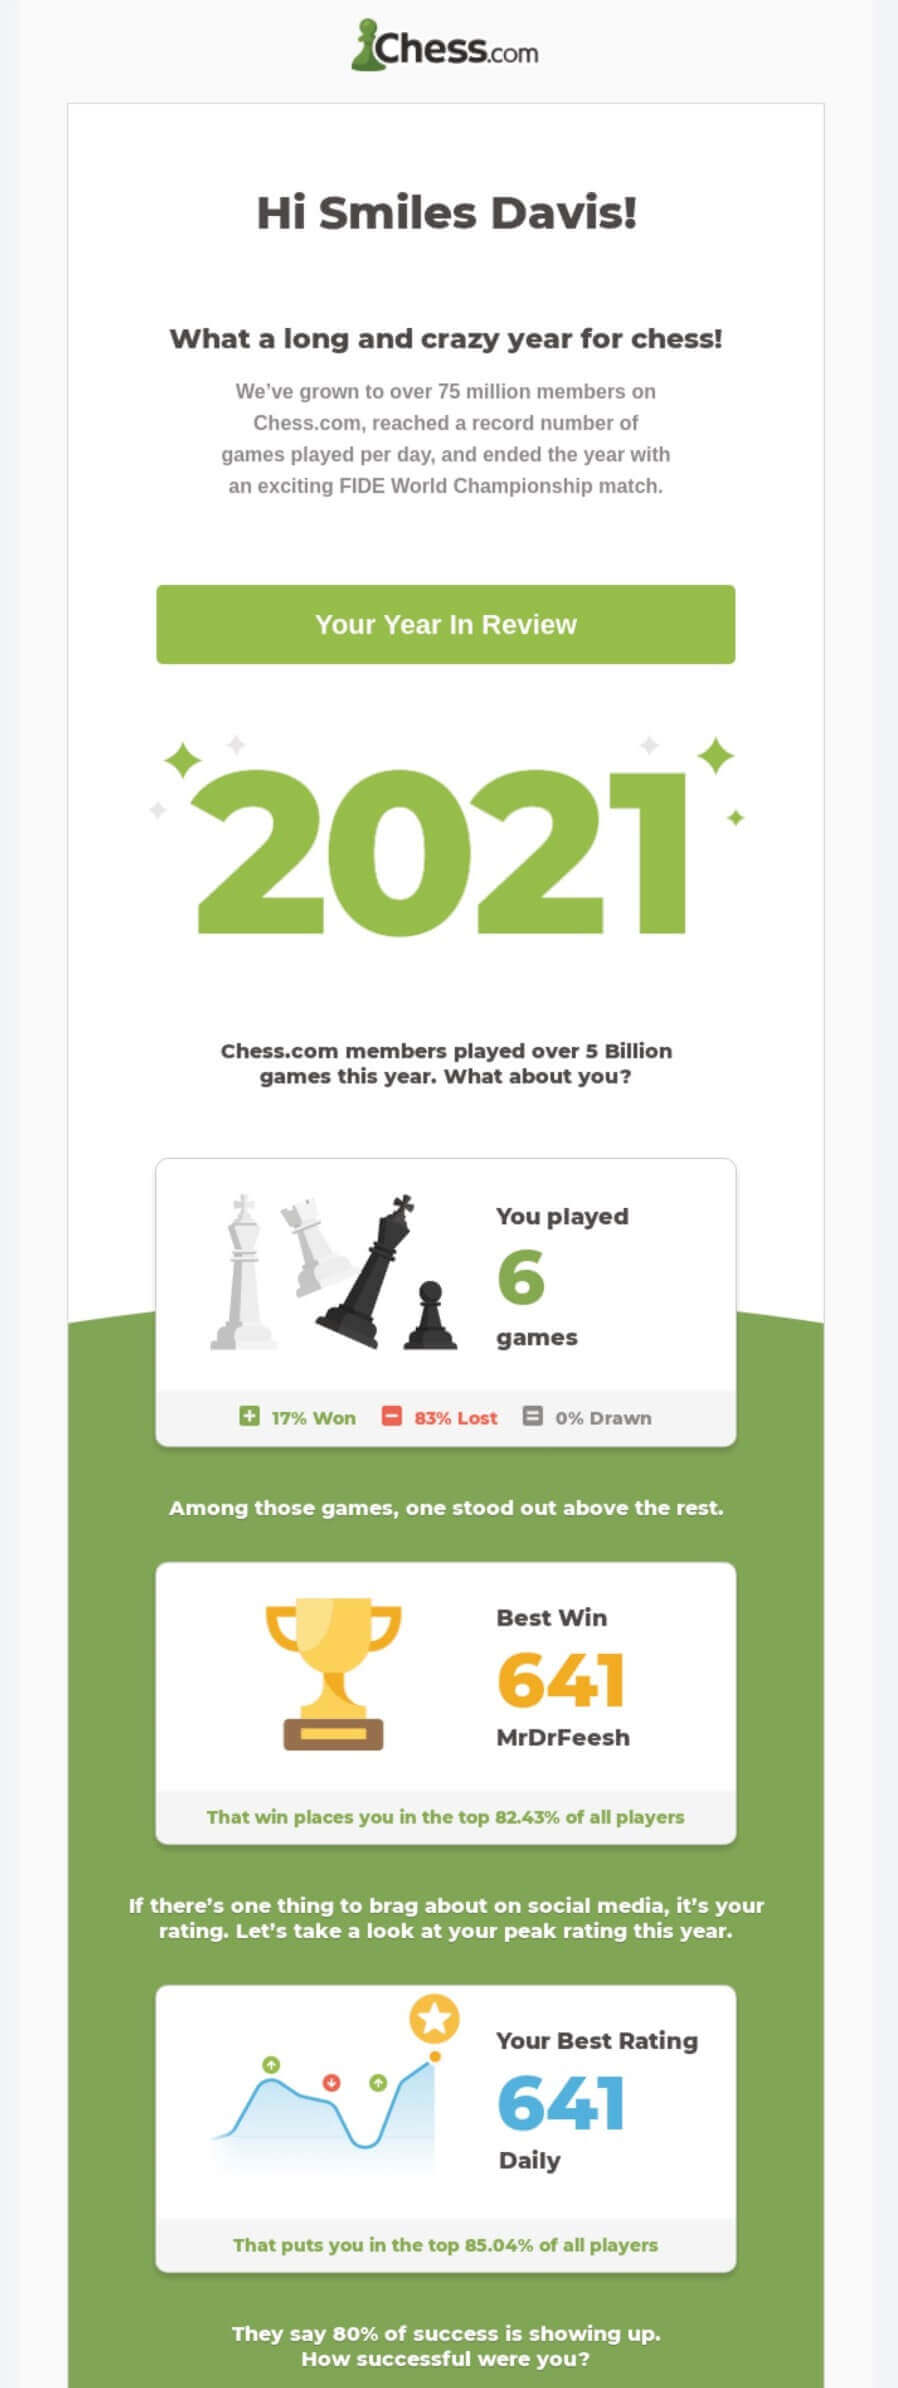 An email with user statistics for 2021 including the number of games played, the best win, and rating.